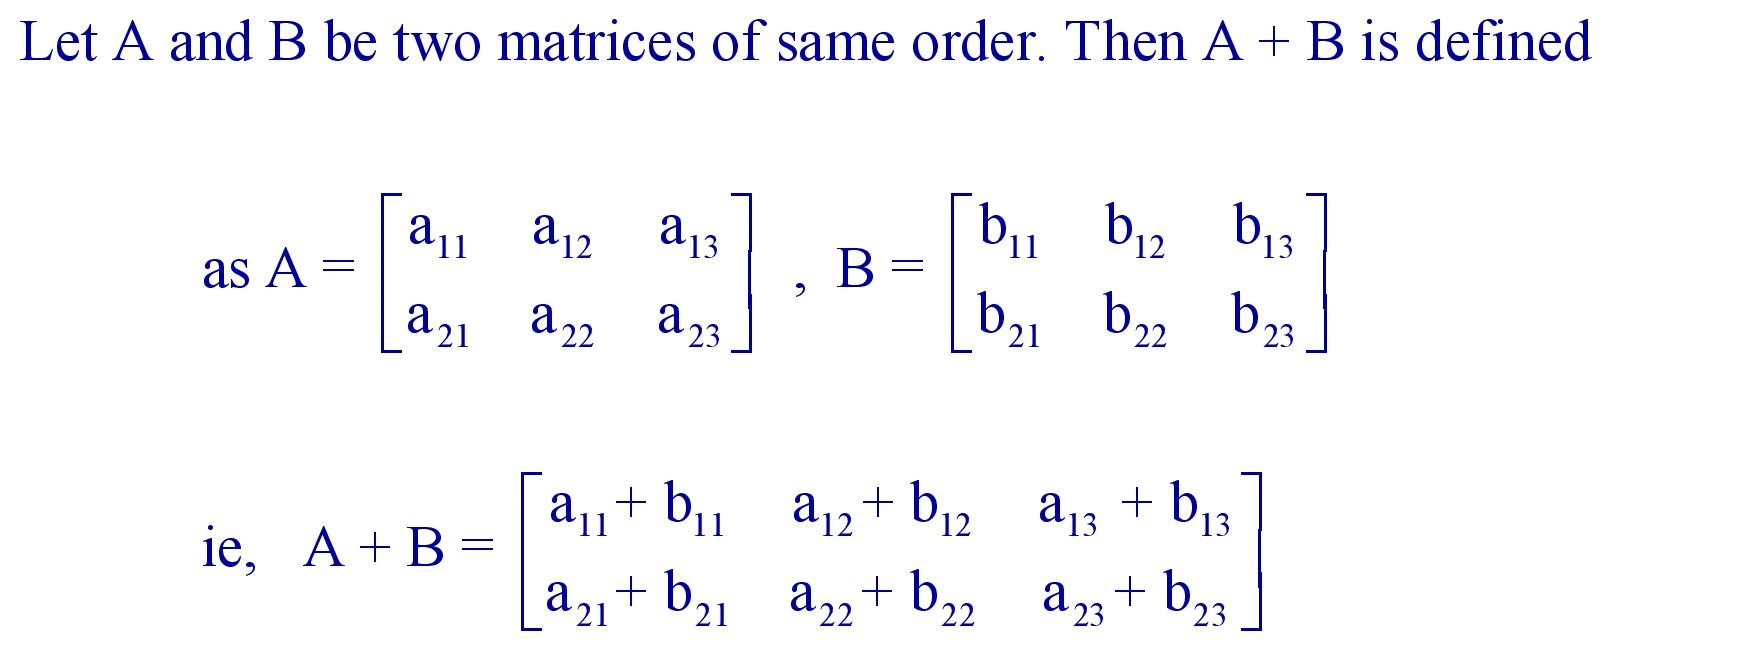 Addition of two matrices in same order